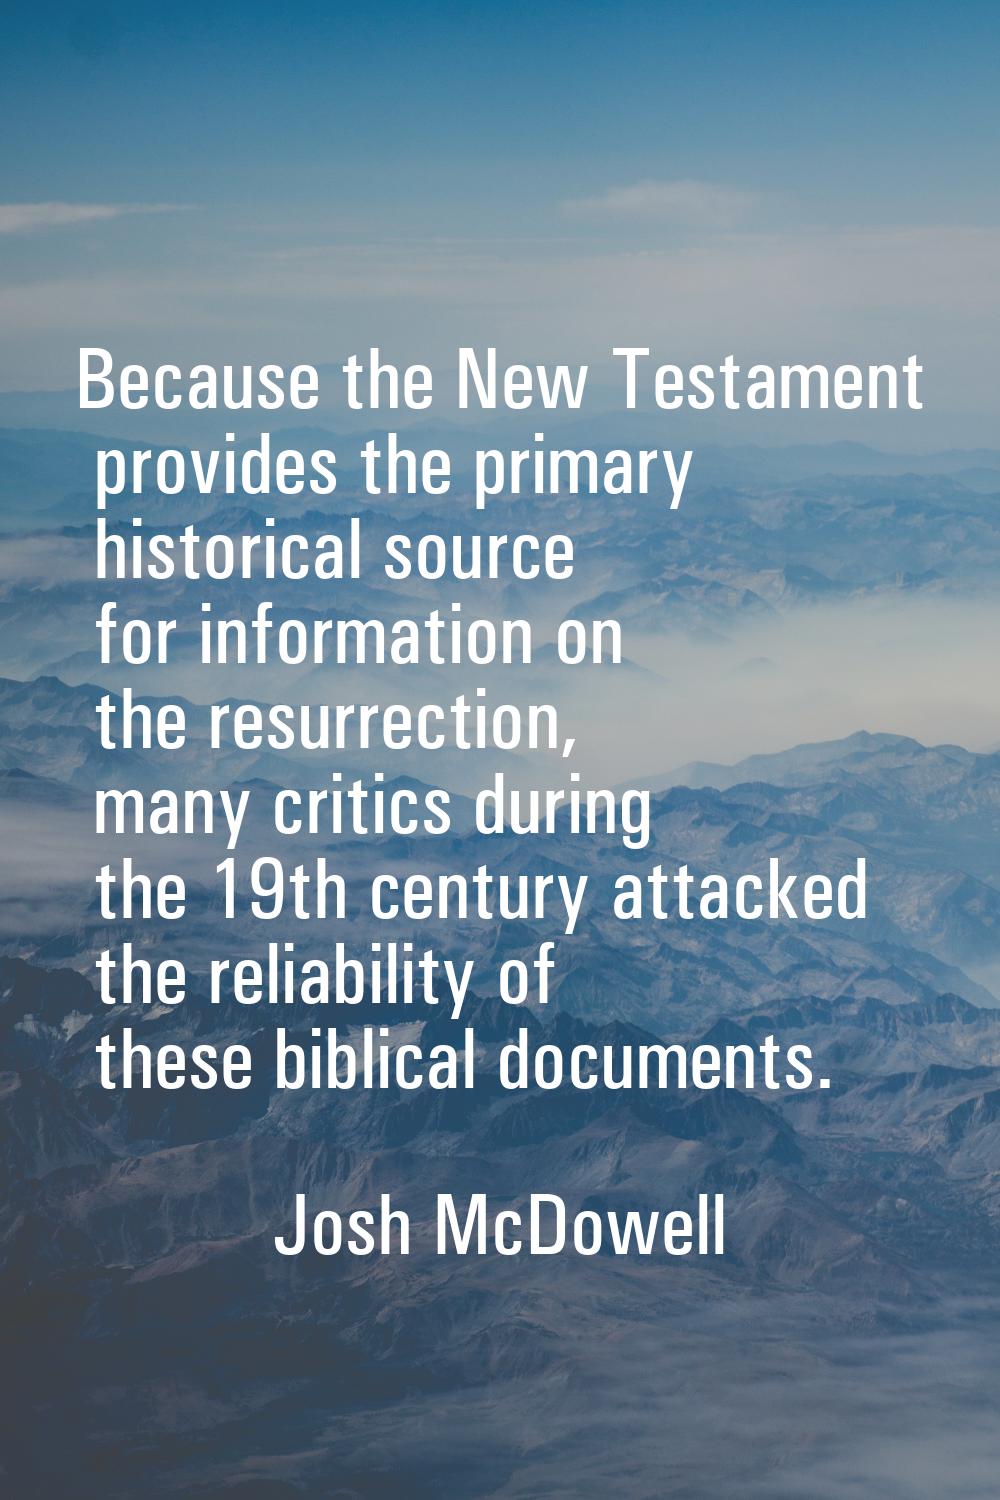 Because the New Testament provides the primary historical source for information on the resurrectio